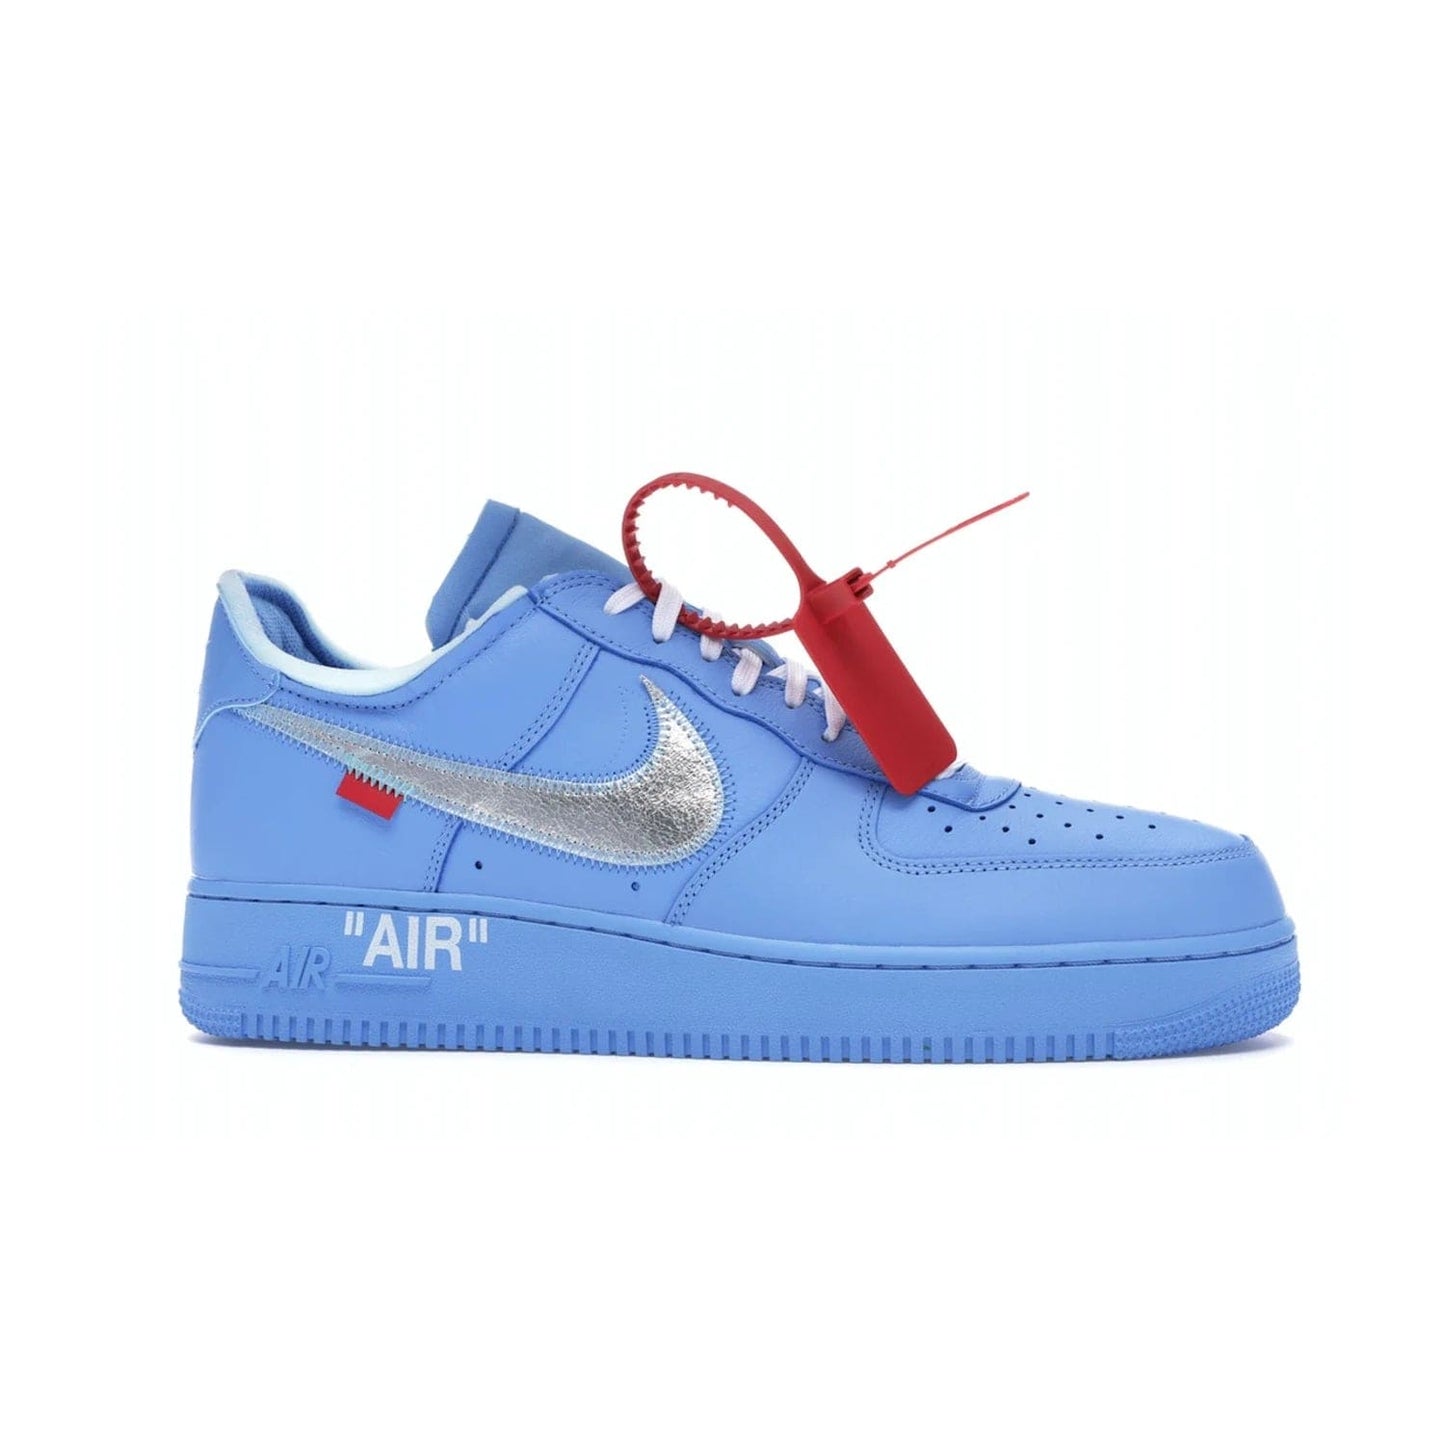 Nike Air Force 1 Low Off-White MCA University Blue - Image 2 - Only at www.BallersClubKickz.com - Virgil Abloh's Air Force 1 Low Off-White MCA University Blue: Features University Blue leather and midsole, reflective silver Nike Swoosh, red zip tie, white laces, and iconic Off-White™ branding. A must-have for any Virgil Abloh enthusiast.